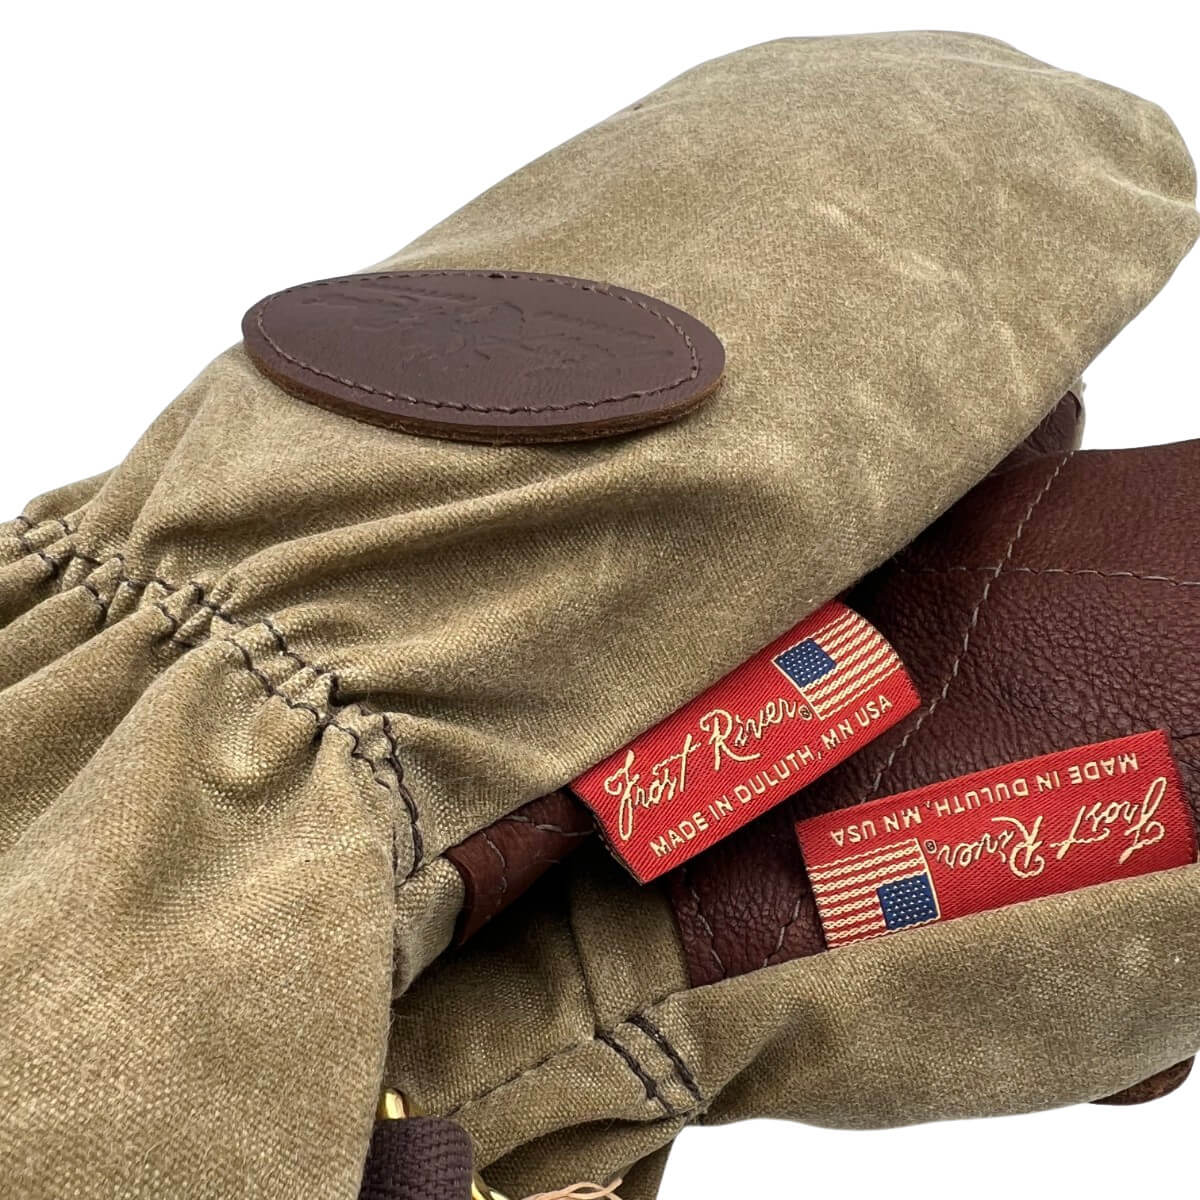 Frost River Great Northern Choppers Polar Mittens